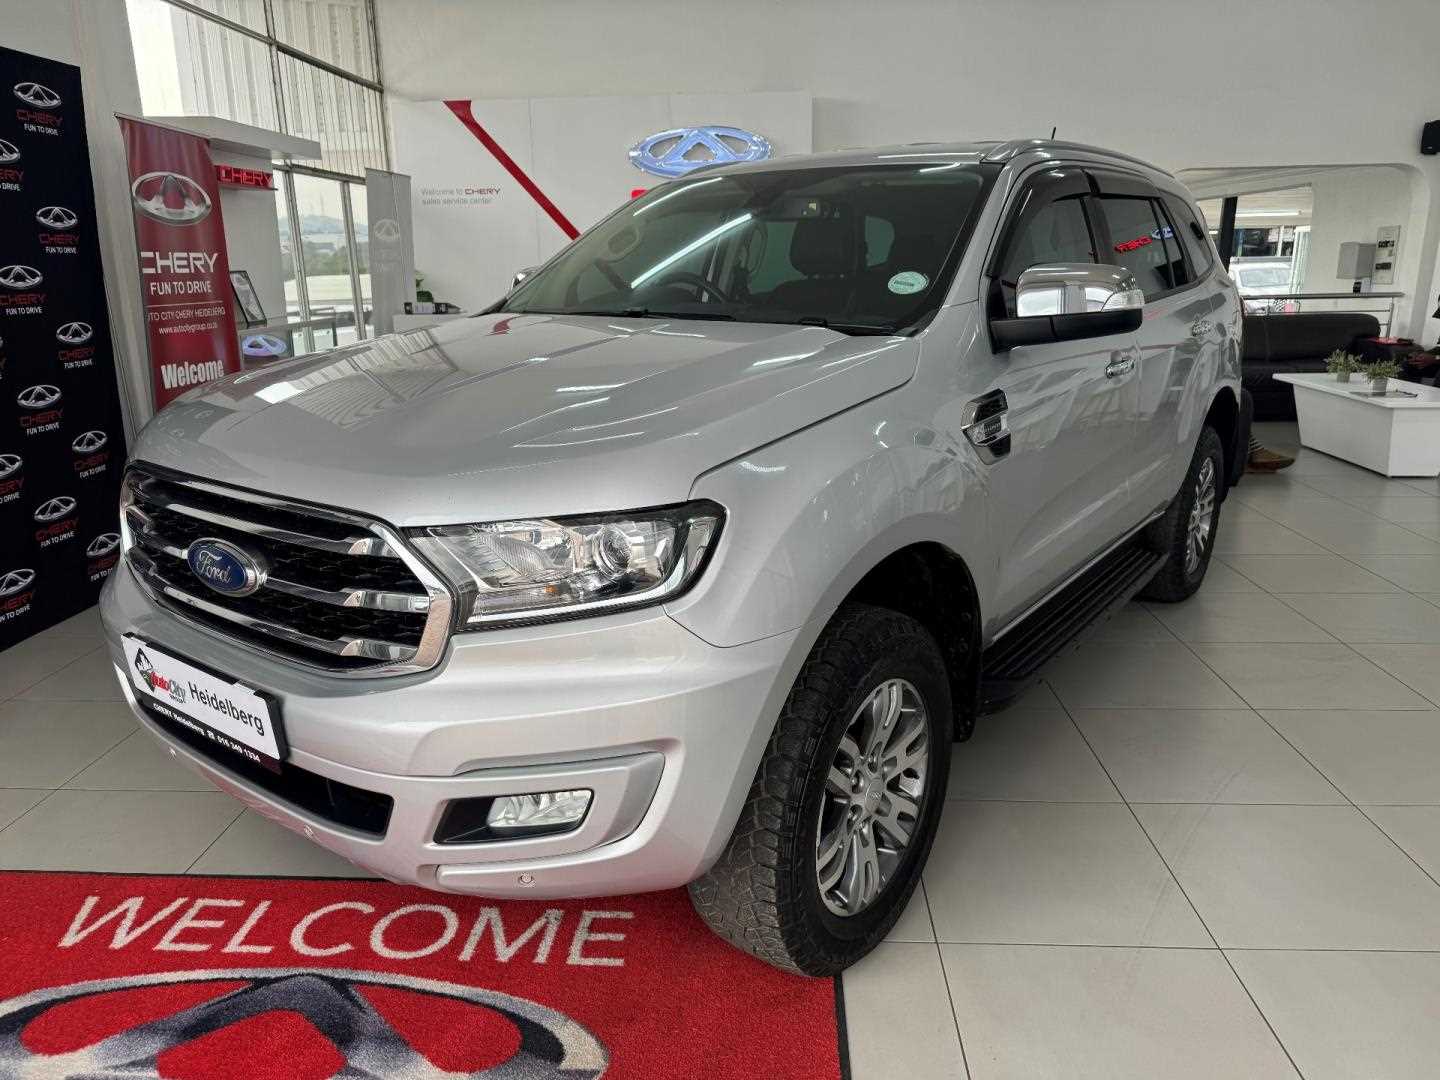 2020 Ford Everest MY20.75 2.0 Turbo Xlt 4X2 At for sale - 337499